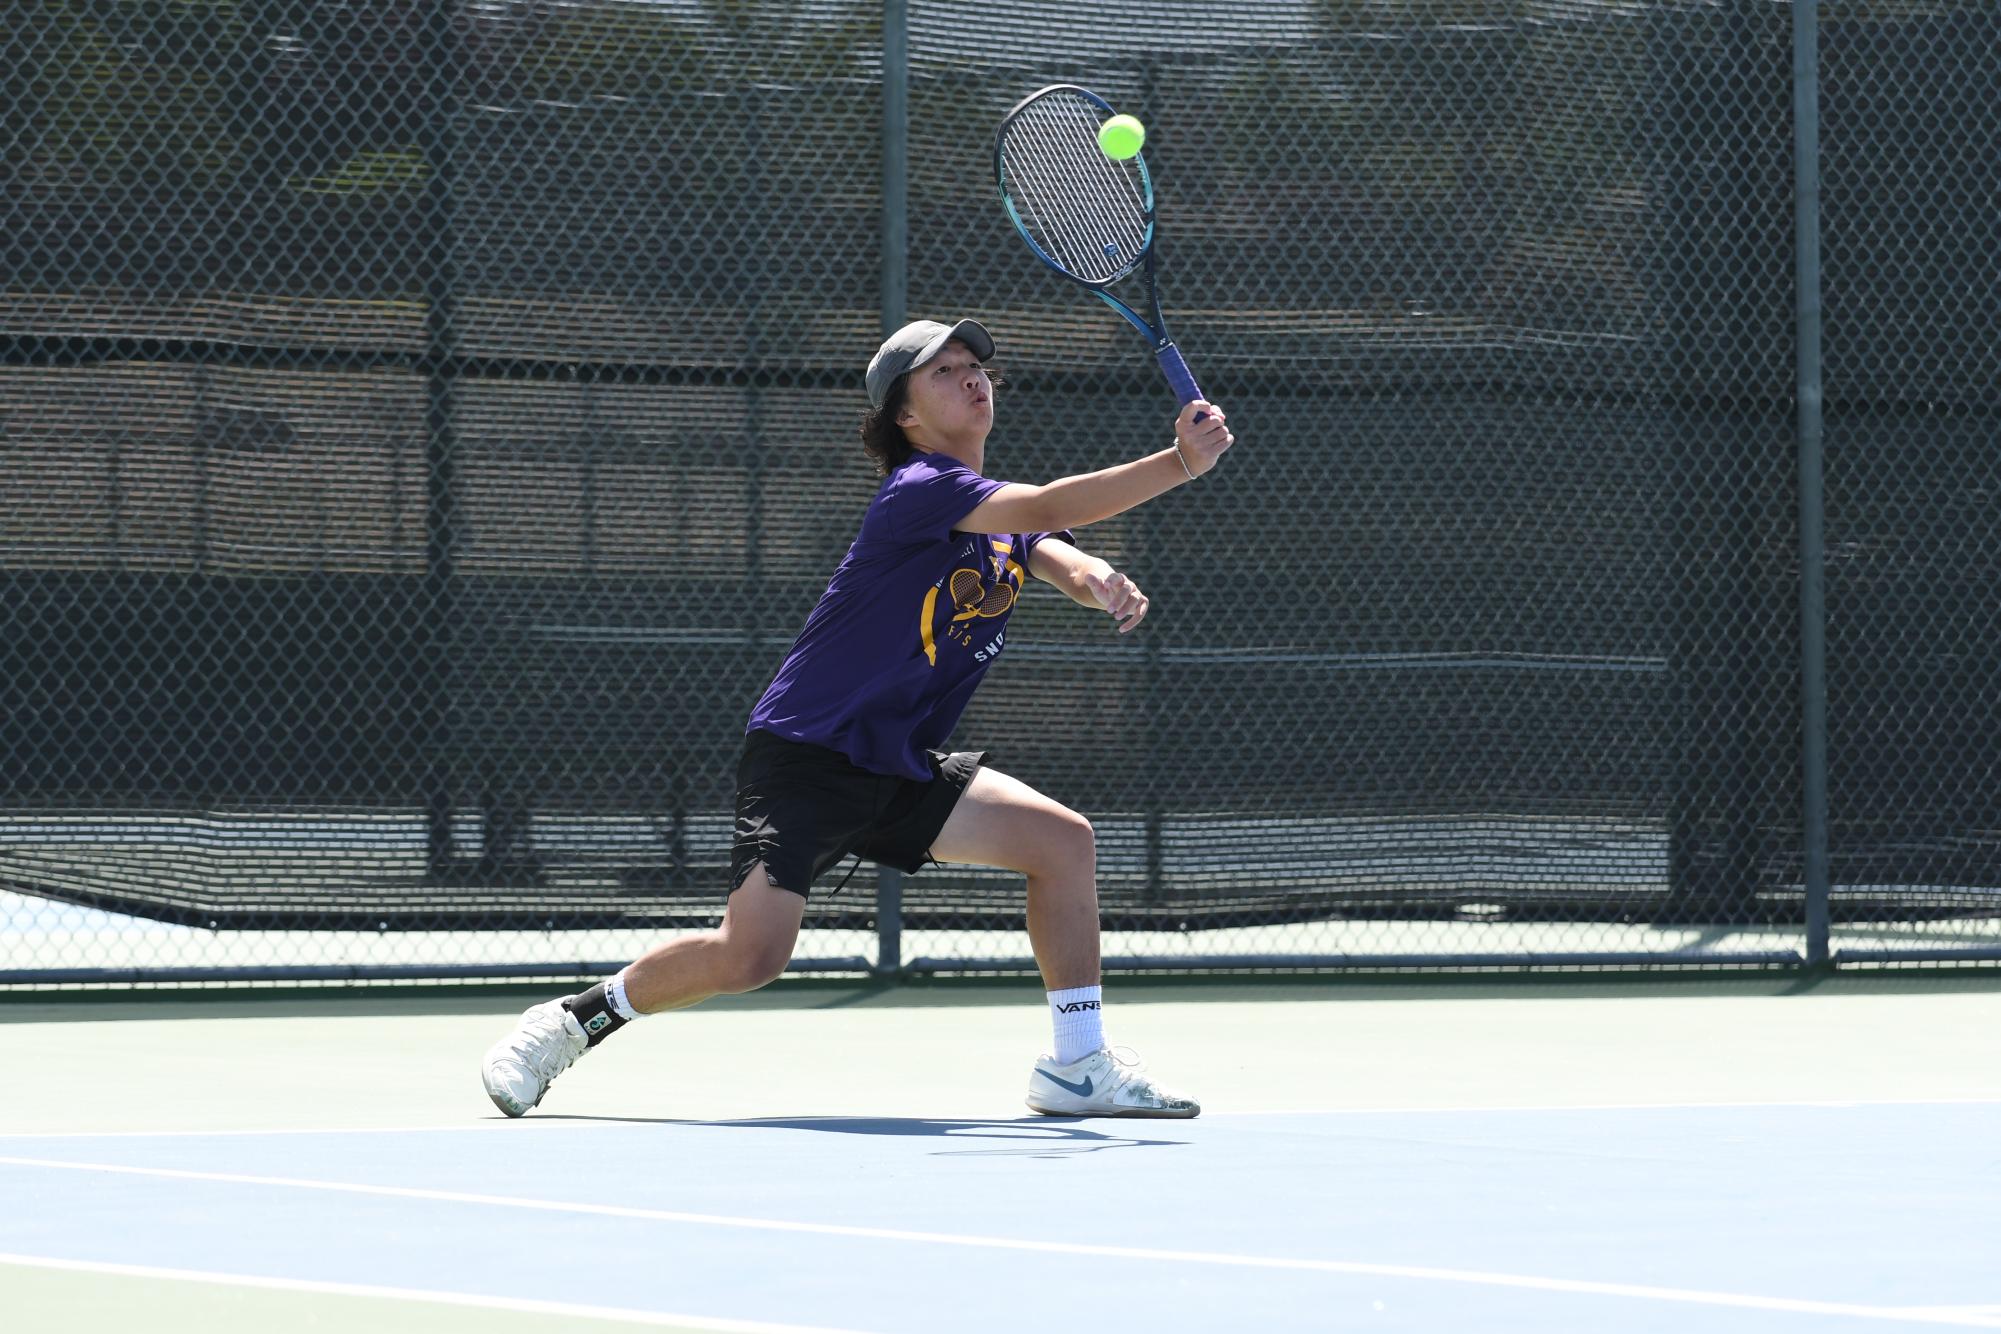 Freshman+Dashel+Parkinson-Lubold+and+Sophomore+Fan+Jia+dominate+annual+Mens+EBAL+Doubles+Tennis+Championship+Winning+First+Place+%F0%9F%A5%87